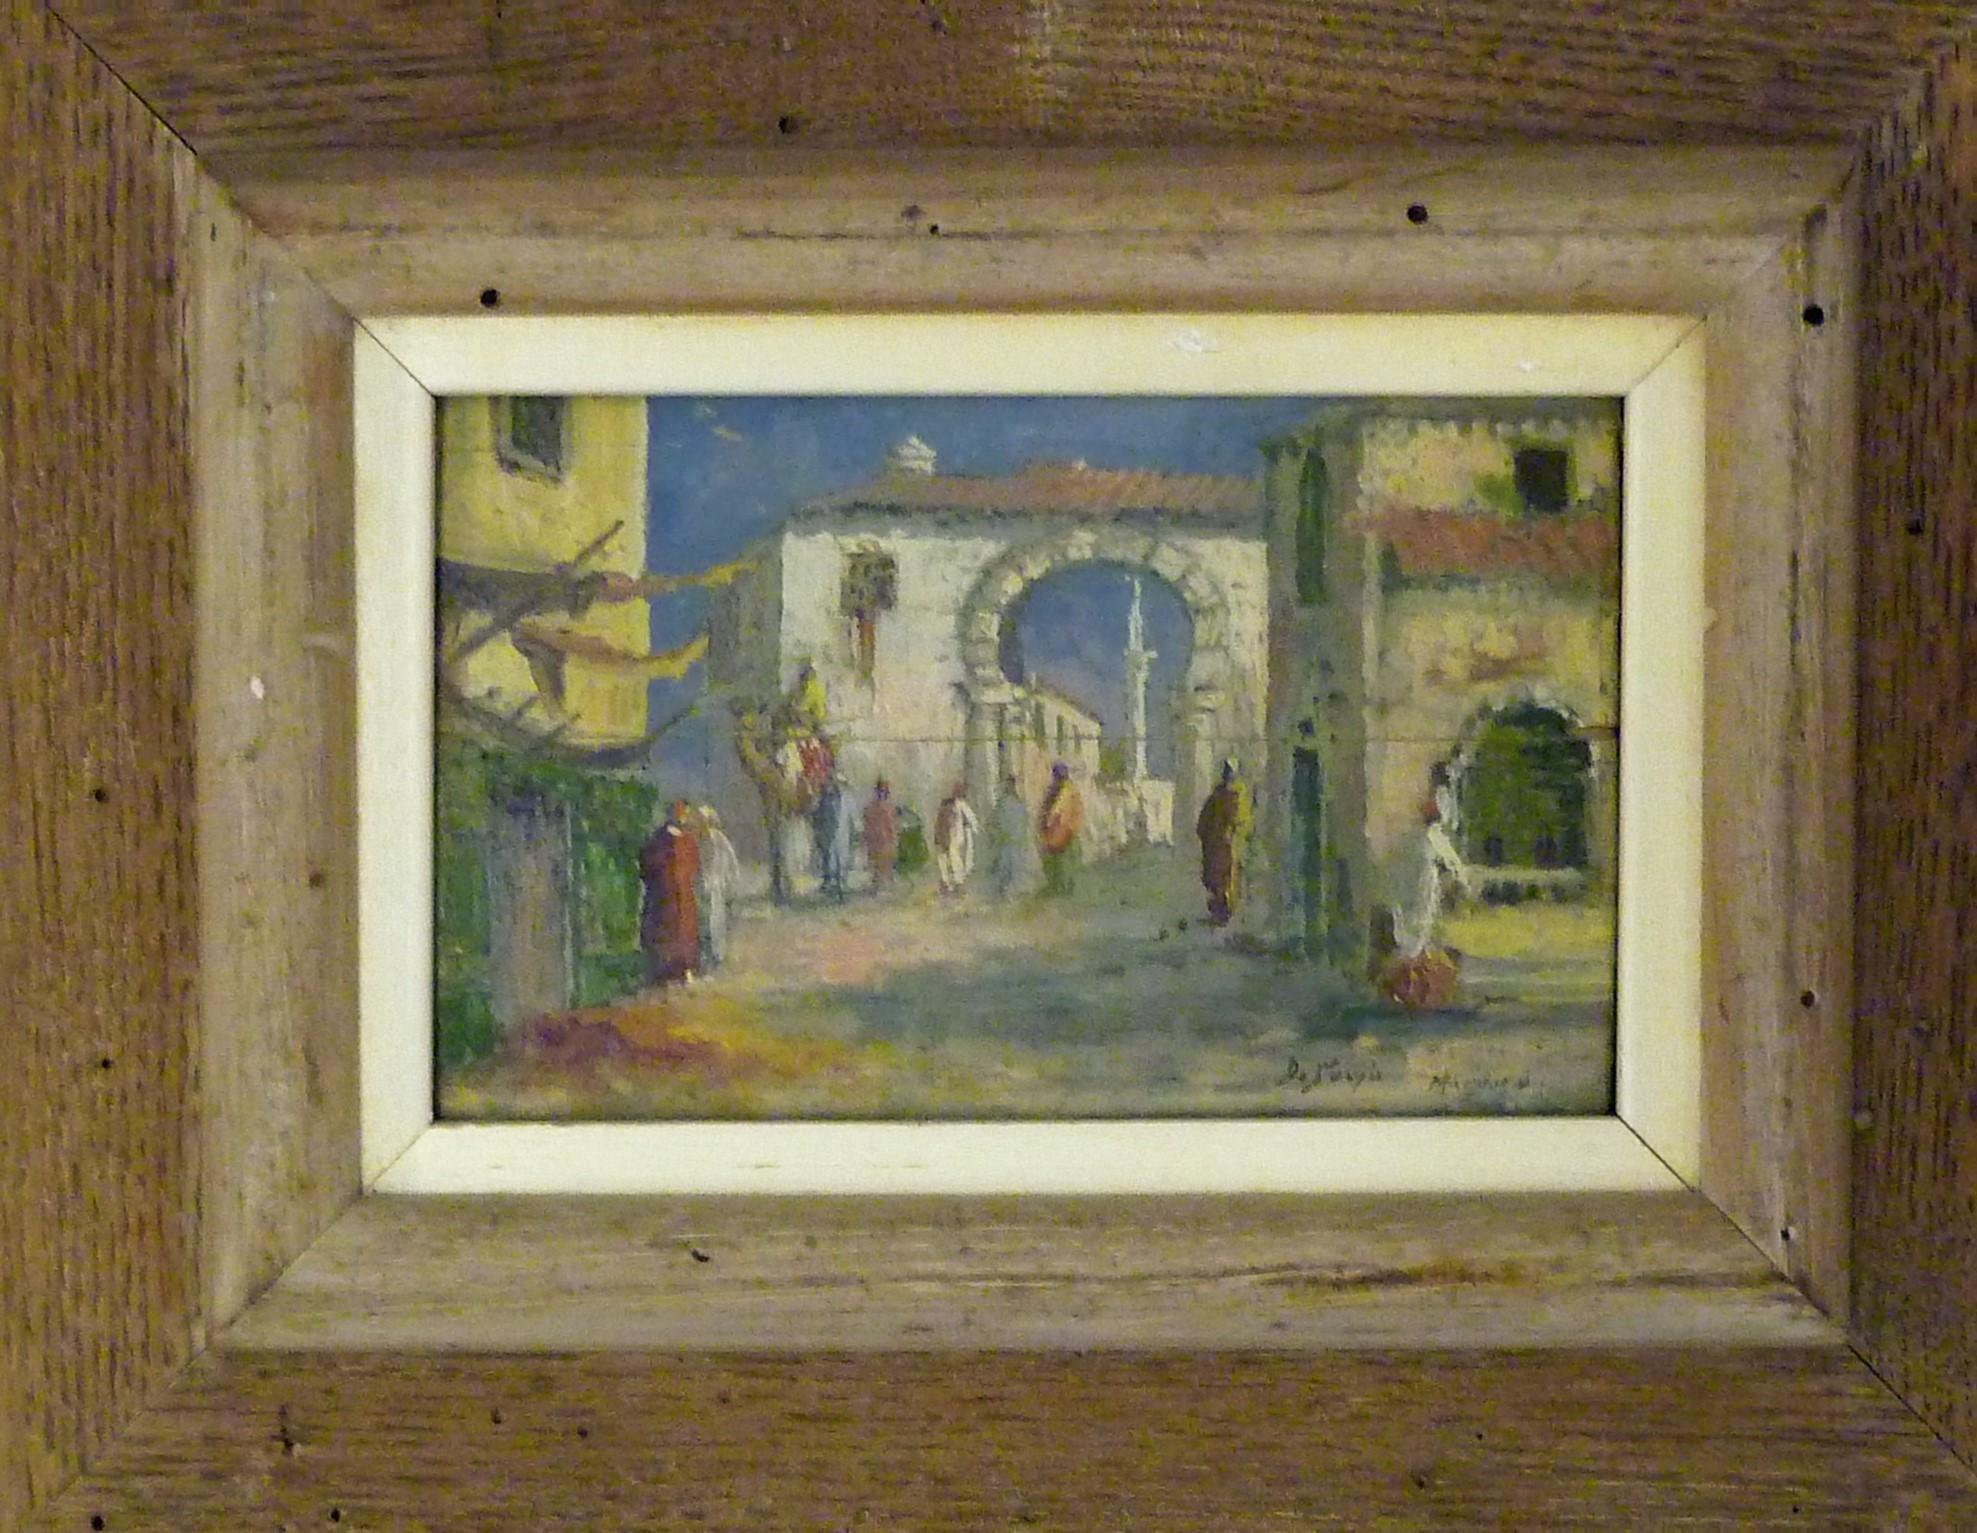 Fine 1930s framed orientalist painting of Marrakech or Morocco. A street scene, in oil painted on board (wood). Signed lower left. Appears to be DoSousa and Marrakech but is however slightly illegible. The painted board has a horizontal crack in the